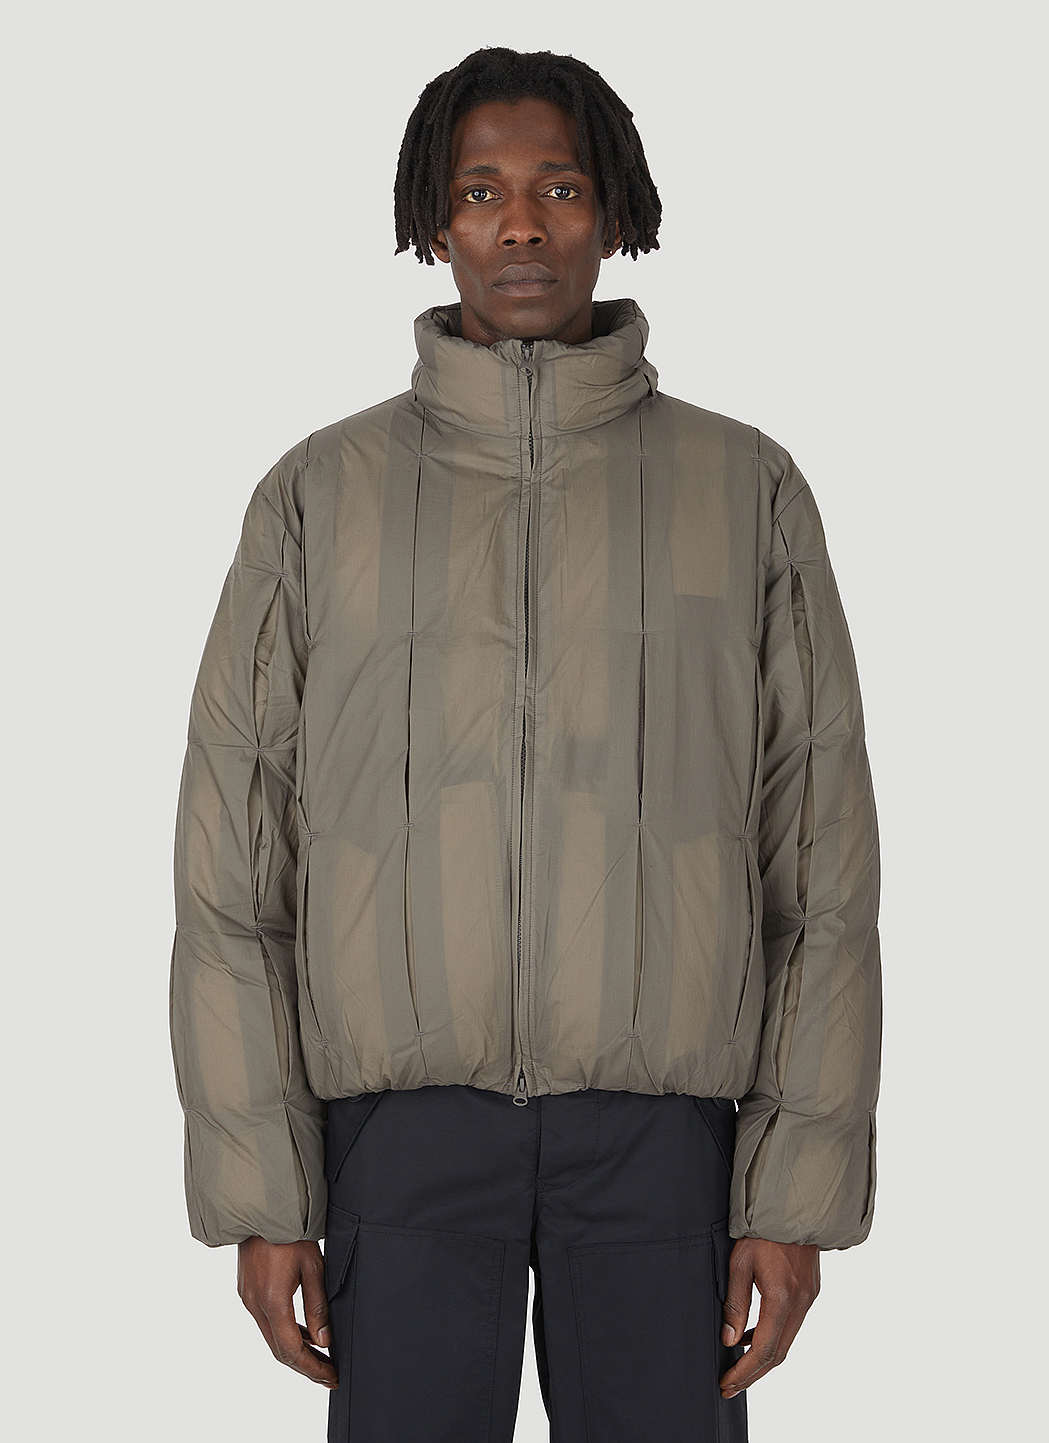 POST ARCHIVE FACTION (PAF) Men's 4.0+ Down Centre Jacket in Brown